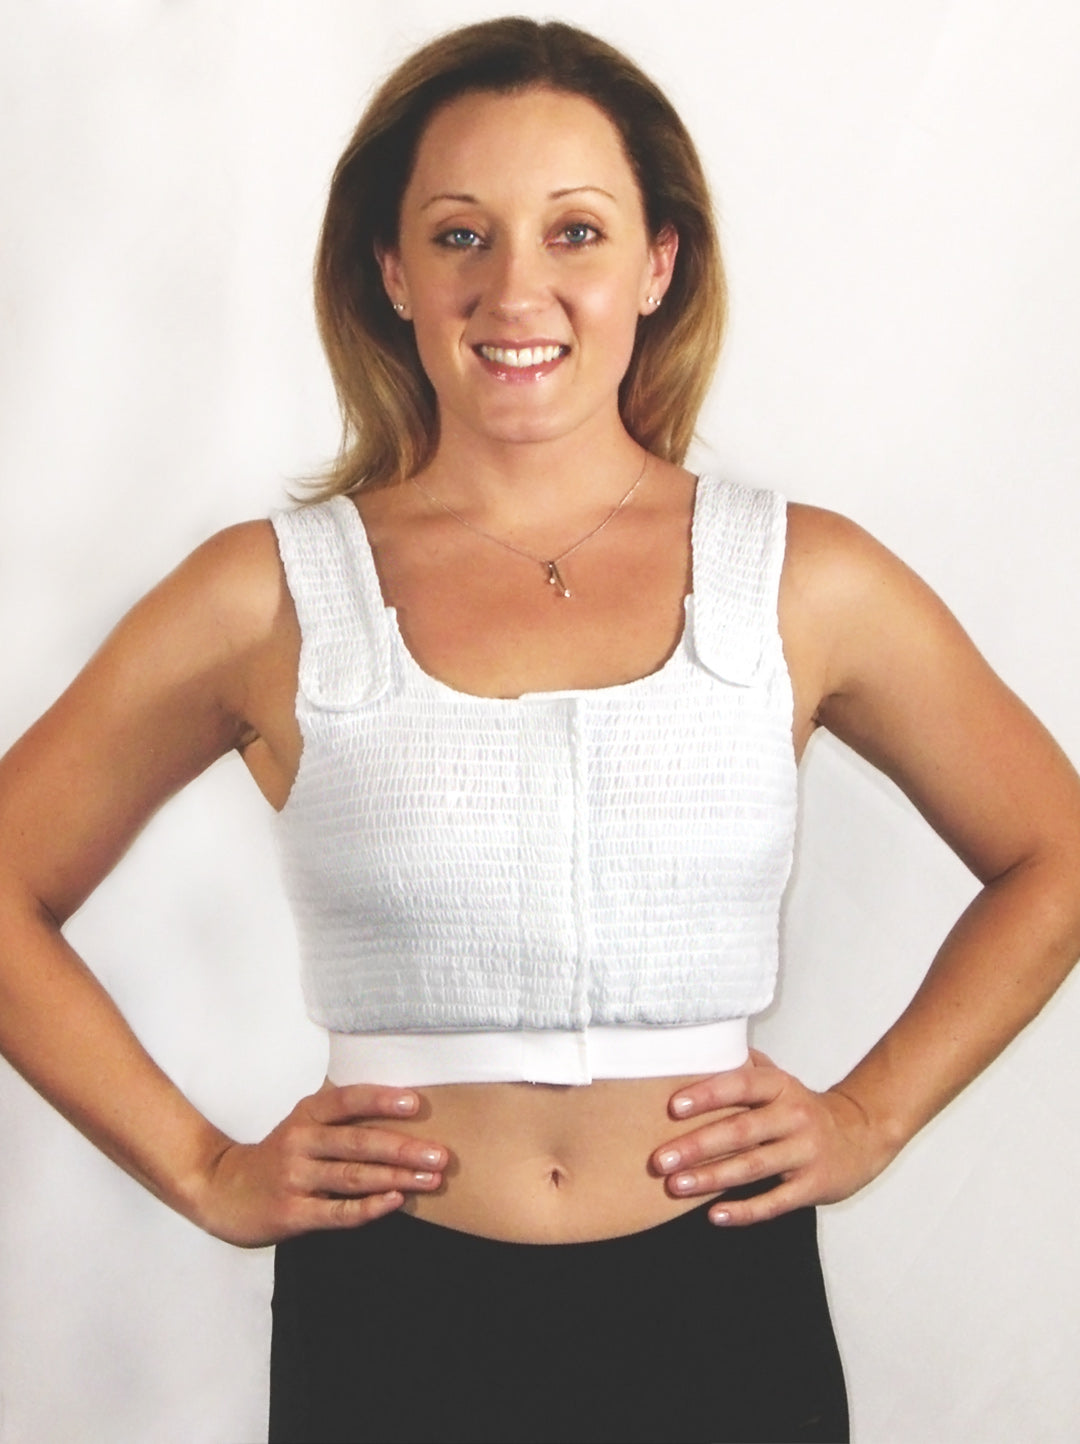 Women Post-Surgical Sports Support Bras for Cancer Patients - CureDiva